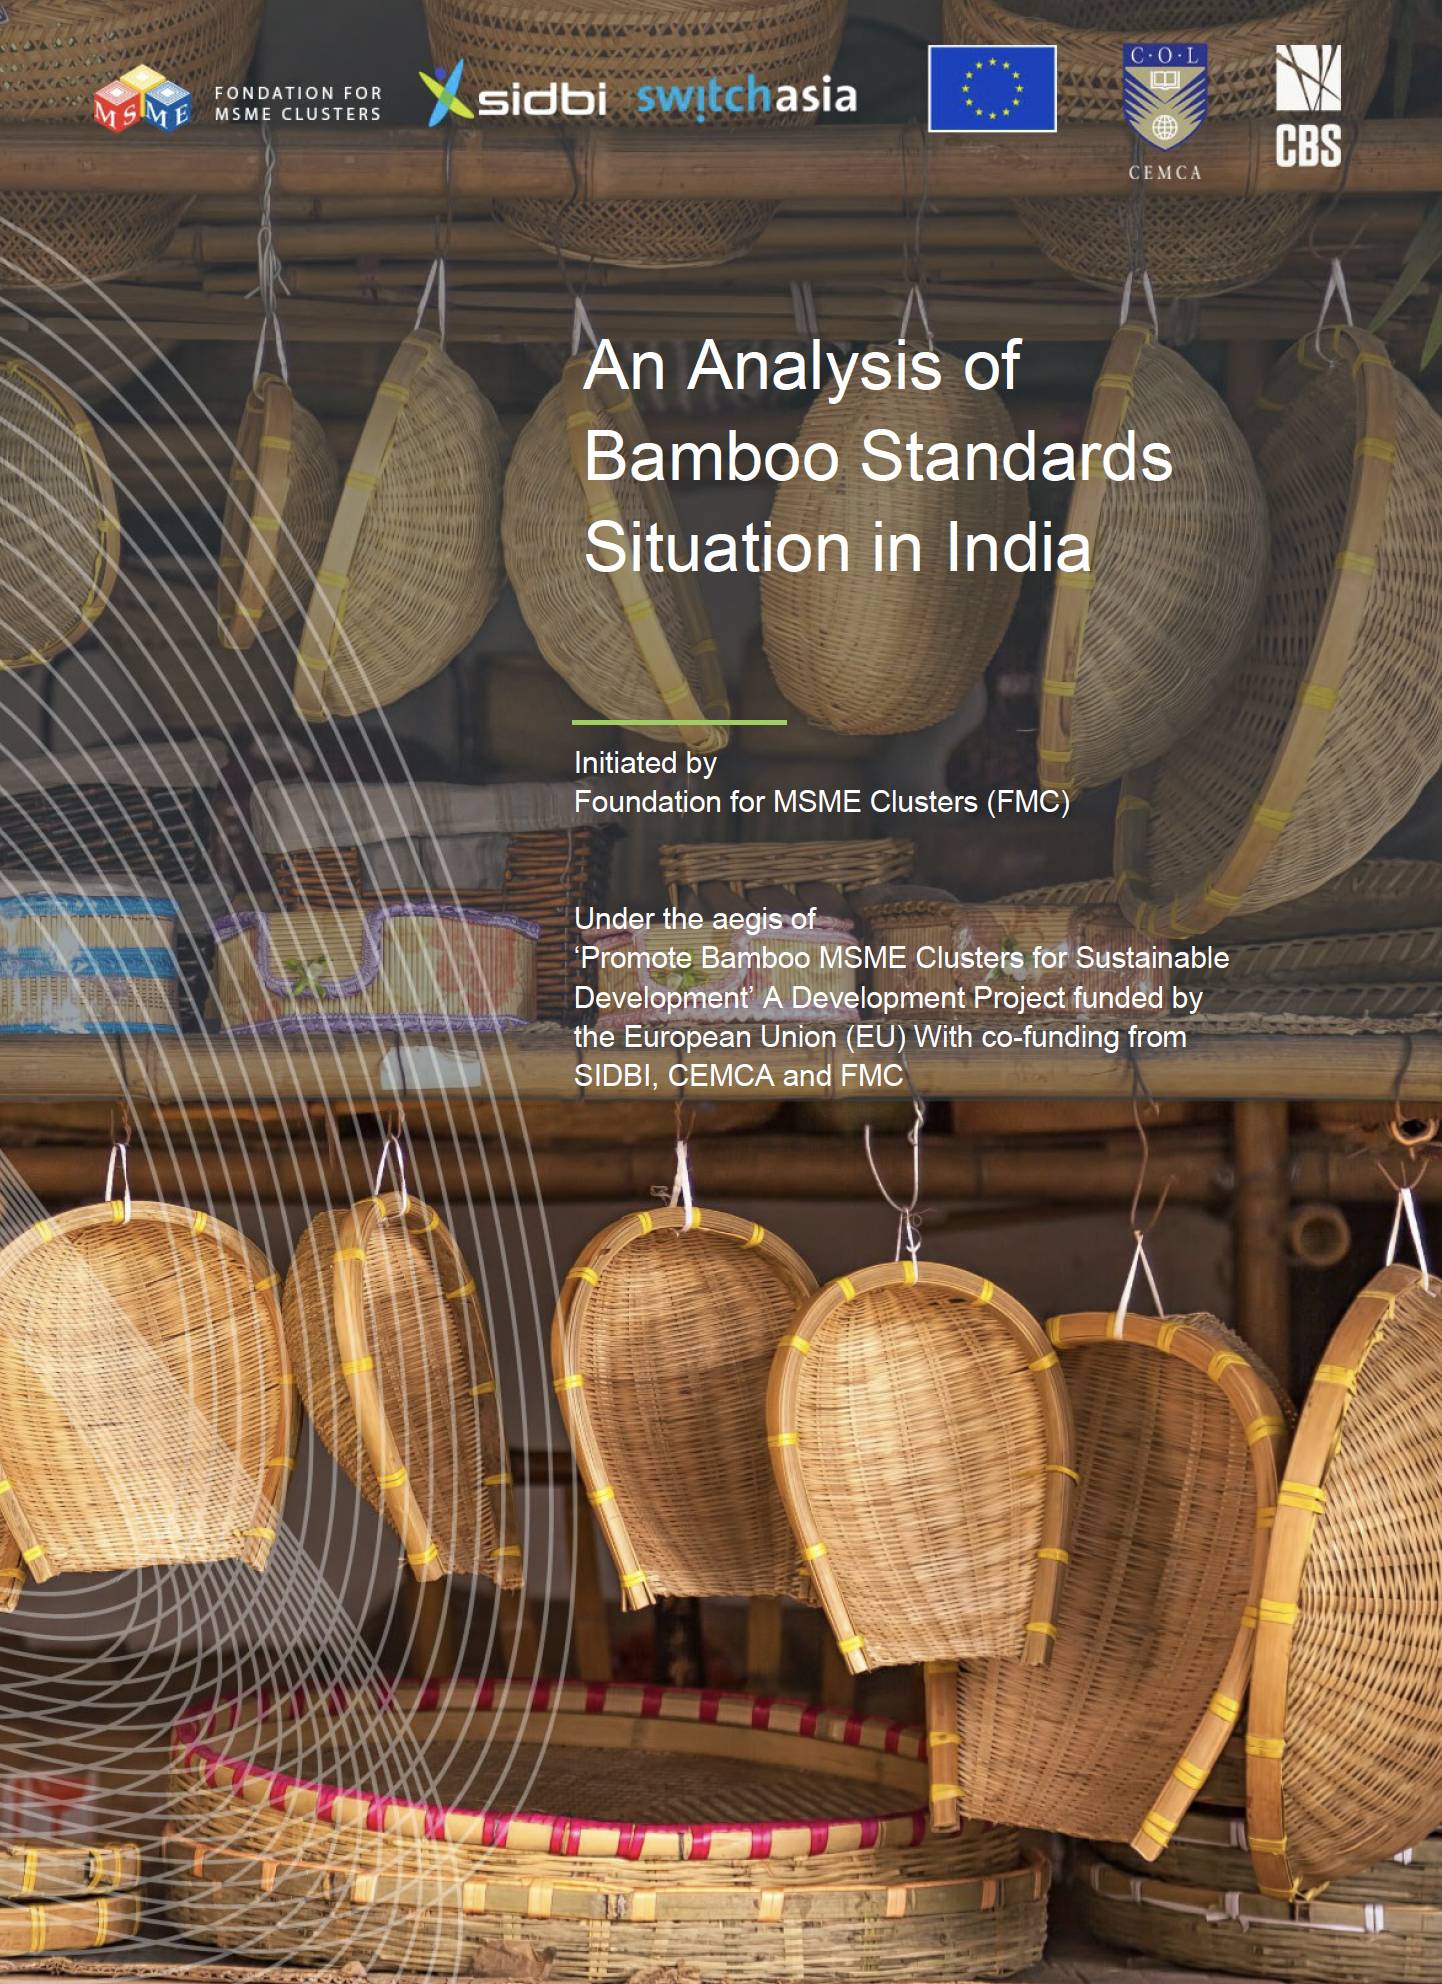 An analysis of bamboo standards situation in India